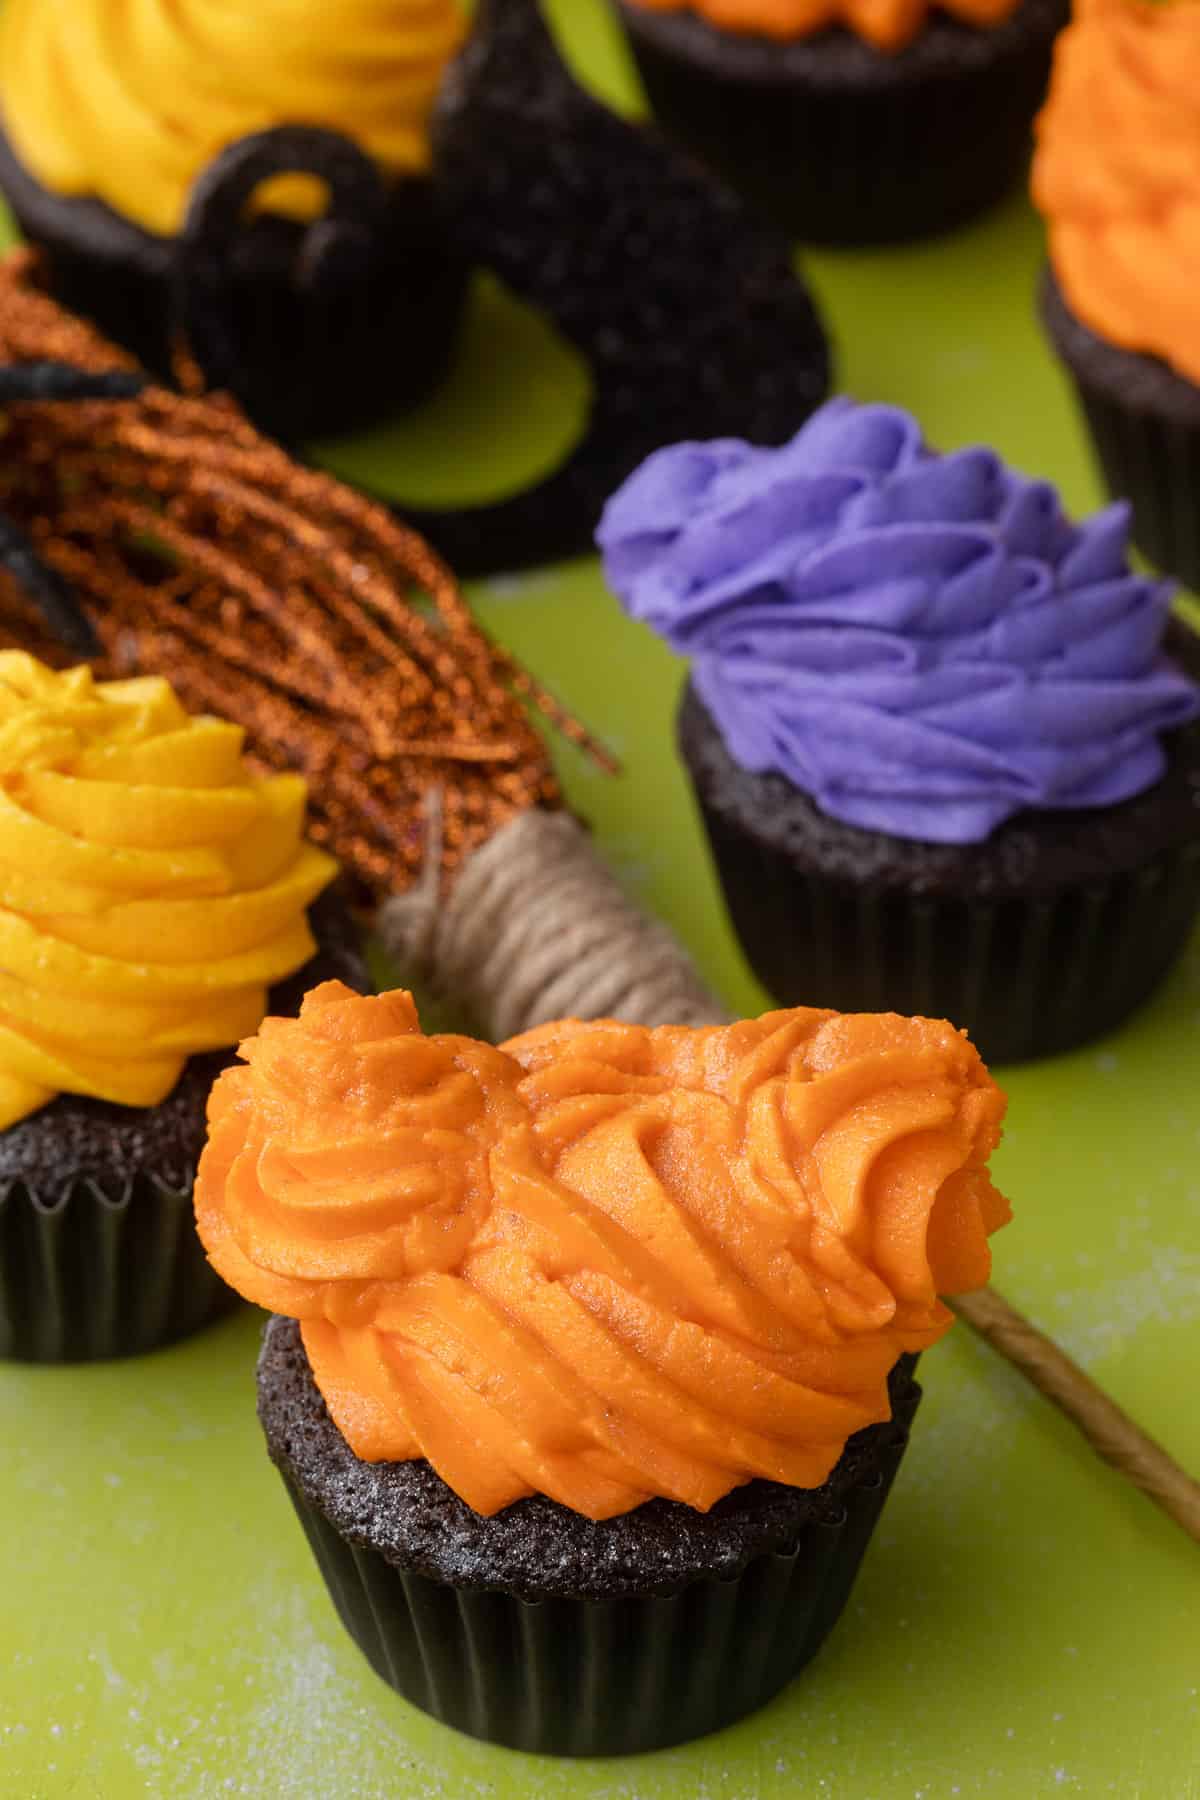 Hocus Pocus themed cupcakes with orange, yellow, and purple swirled frosting on top.